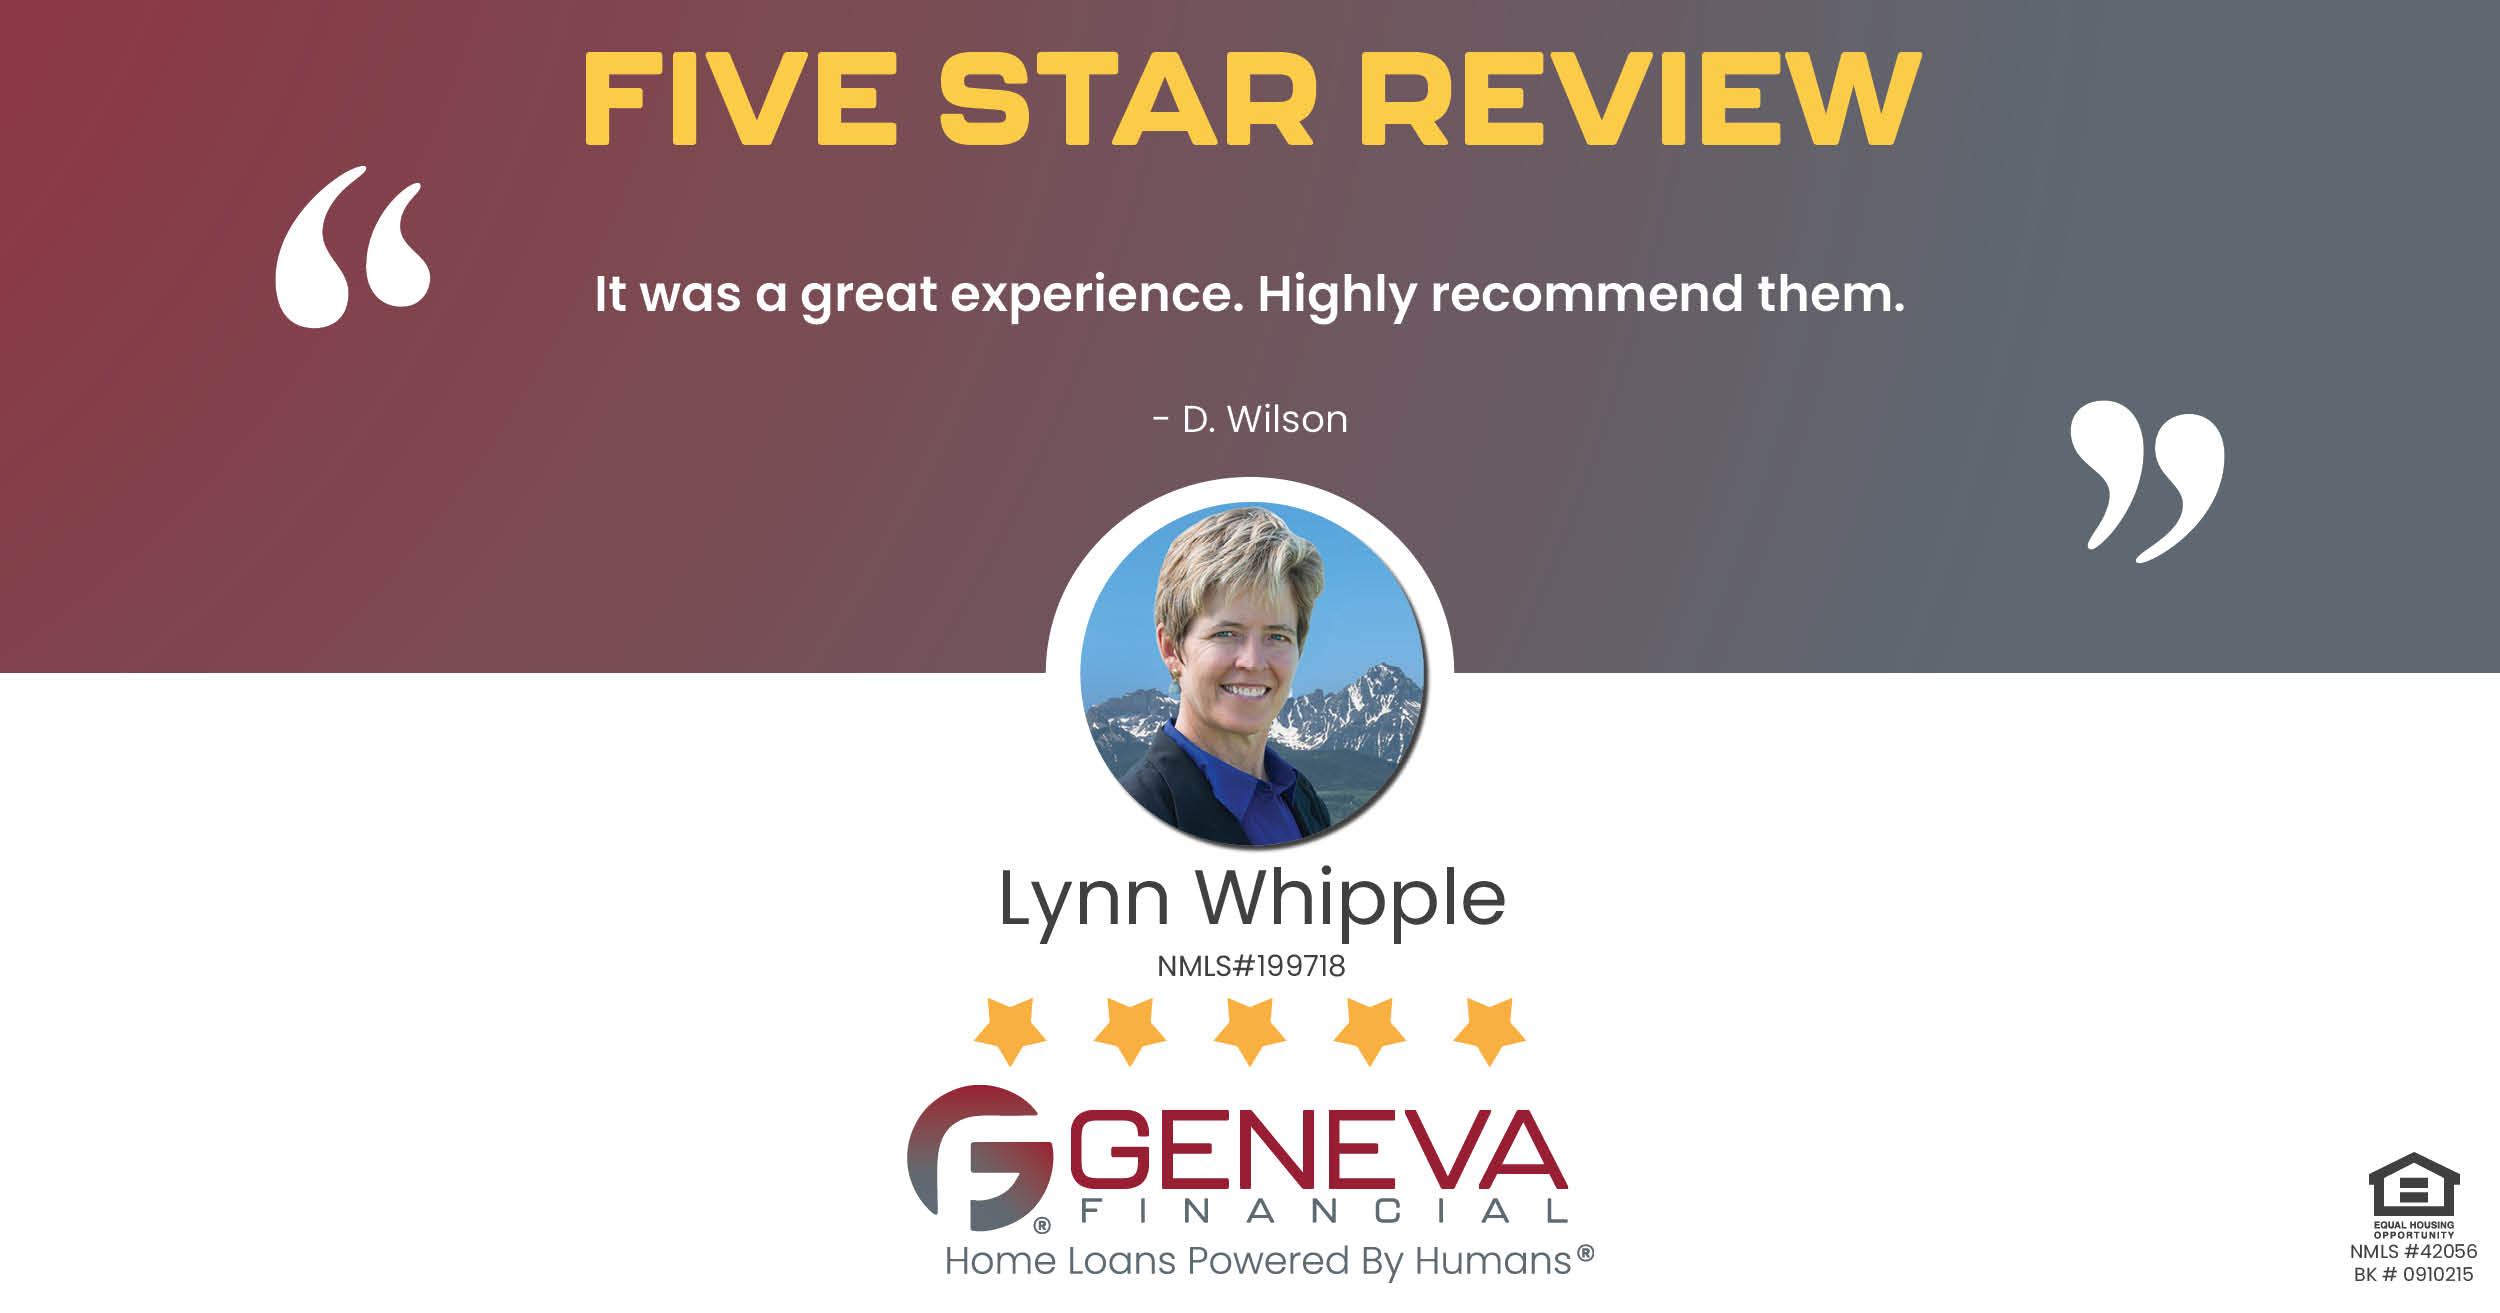 5 Star Review for Lynn Whipple, Licensed Mortgage Branch Manager with Geneva Financial, Montrose, CO – Home Loans Powered by Humans®.